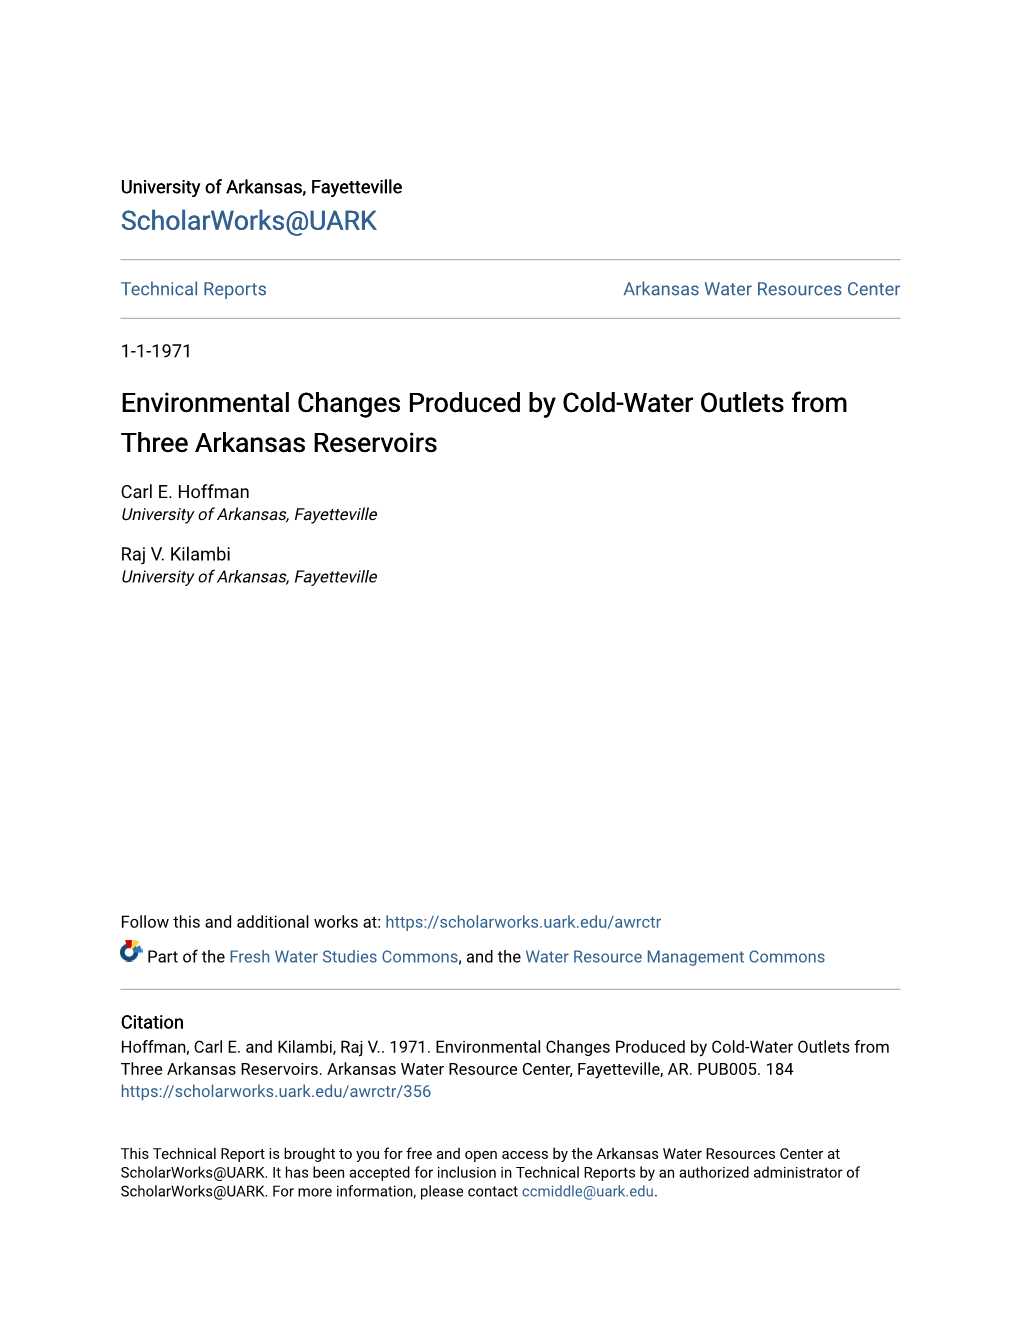 Environmental Changes Produced by Cold-Water Outlets from Three Arkansas Reservoirs